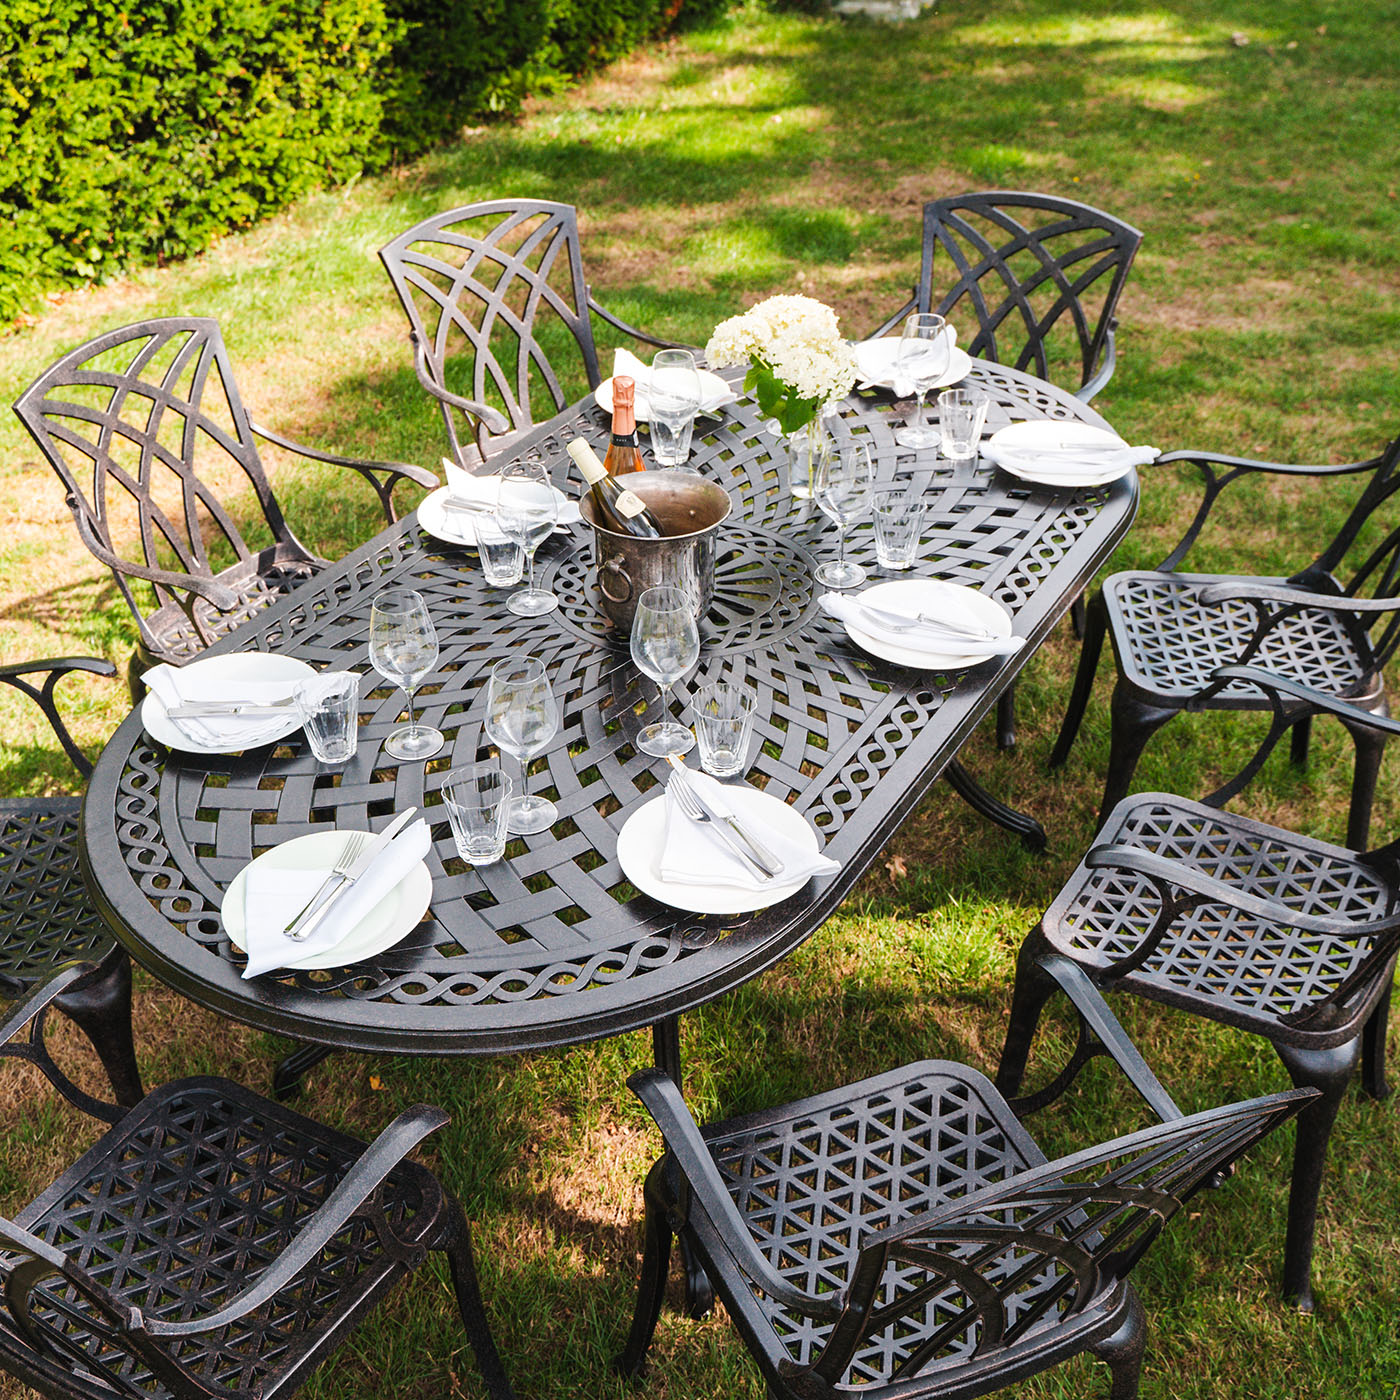 Our Catherine garden table set for a party